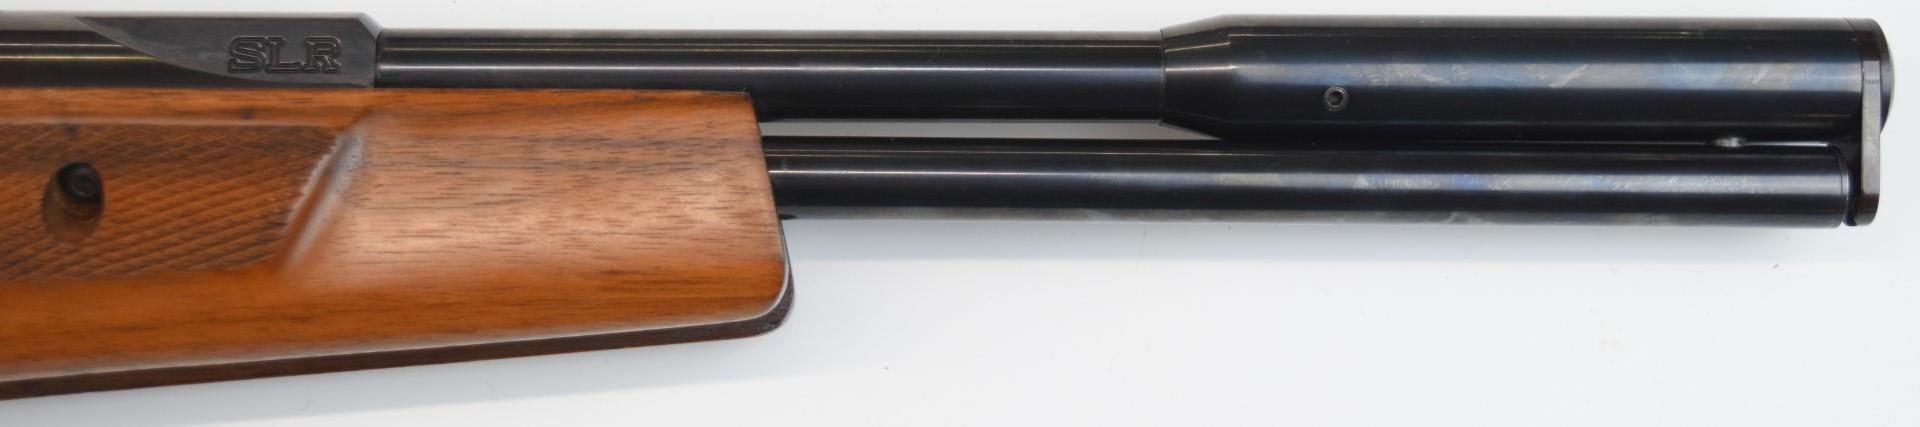 Theoben SLR 190/98 .22 under-lever carbine air rifle with seven shot magazine, chequered semi-pistol - Image 5 of 20